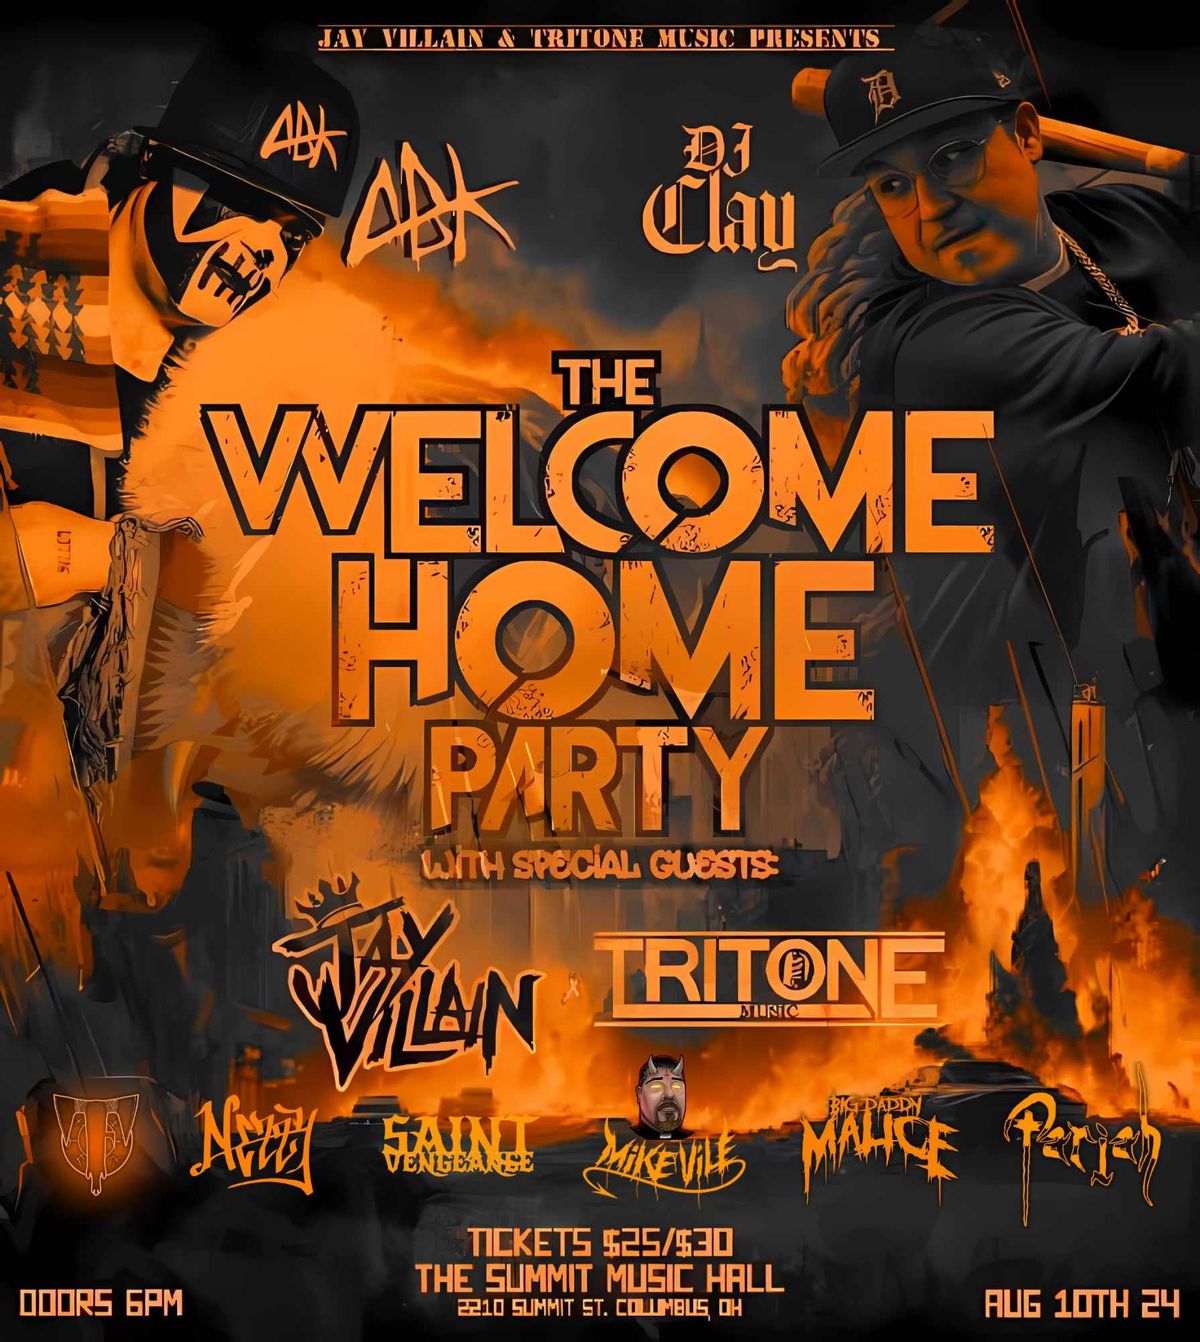 THE WELCOME HOME PARTY ft ABK & Dj Clay, Jay Villain and Tritone - Saturday August 10